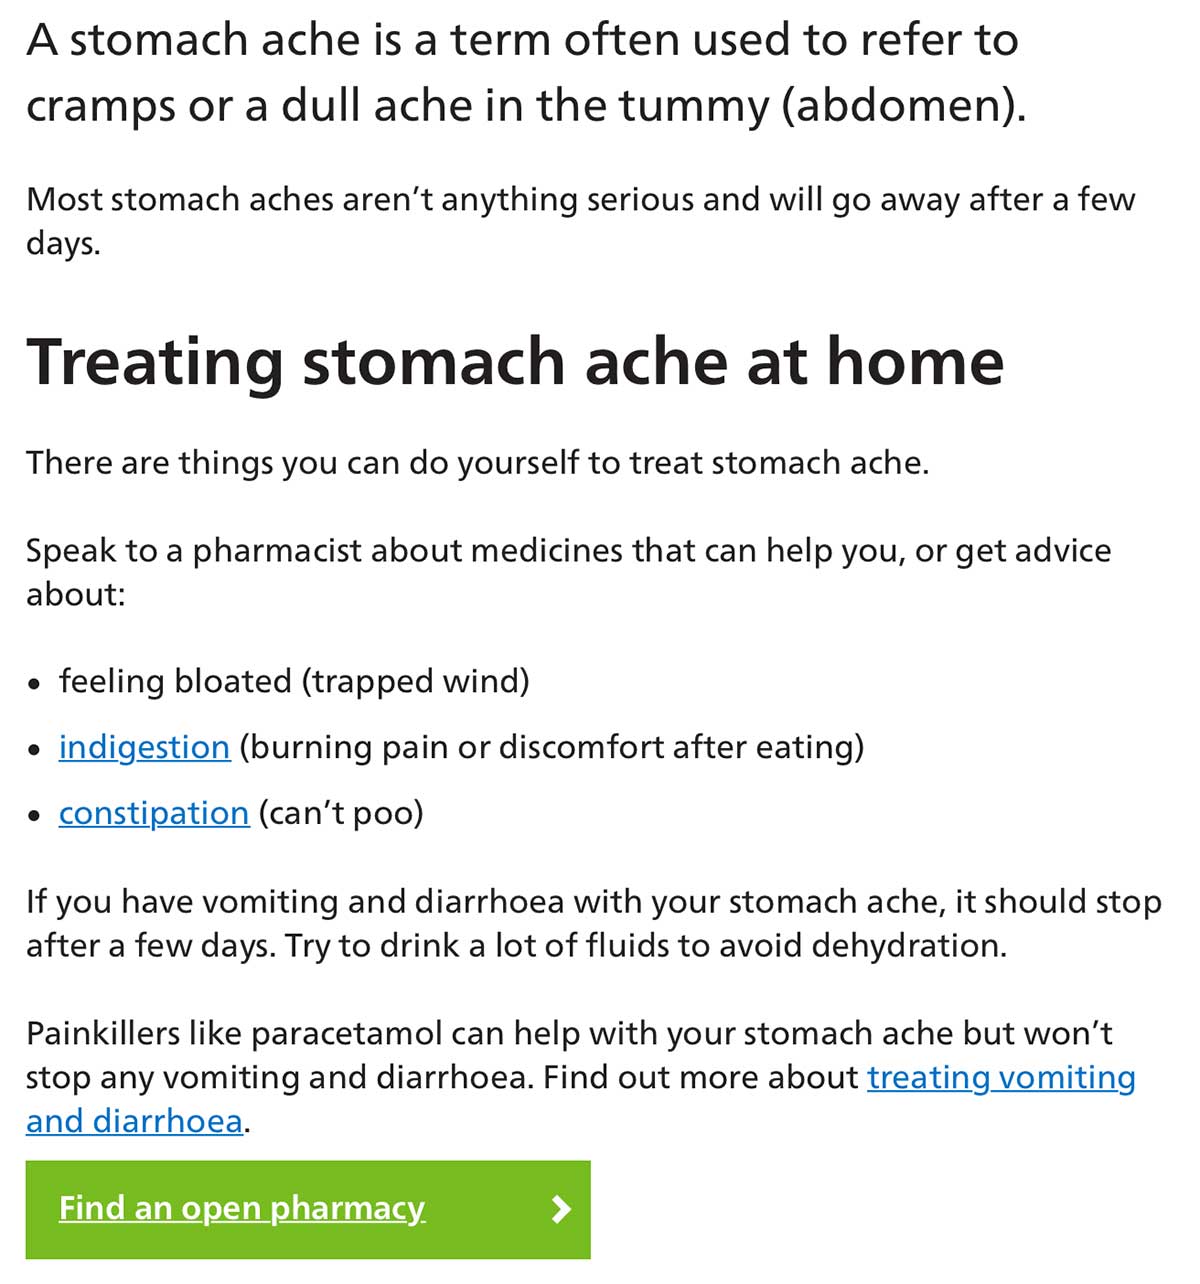 Screen grab of the stomach ache symptoms page